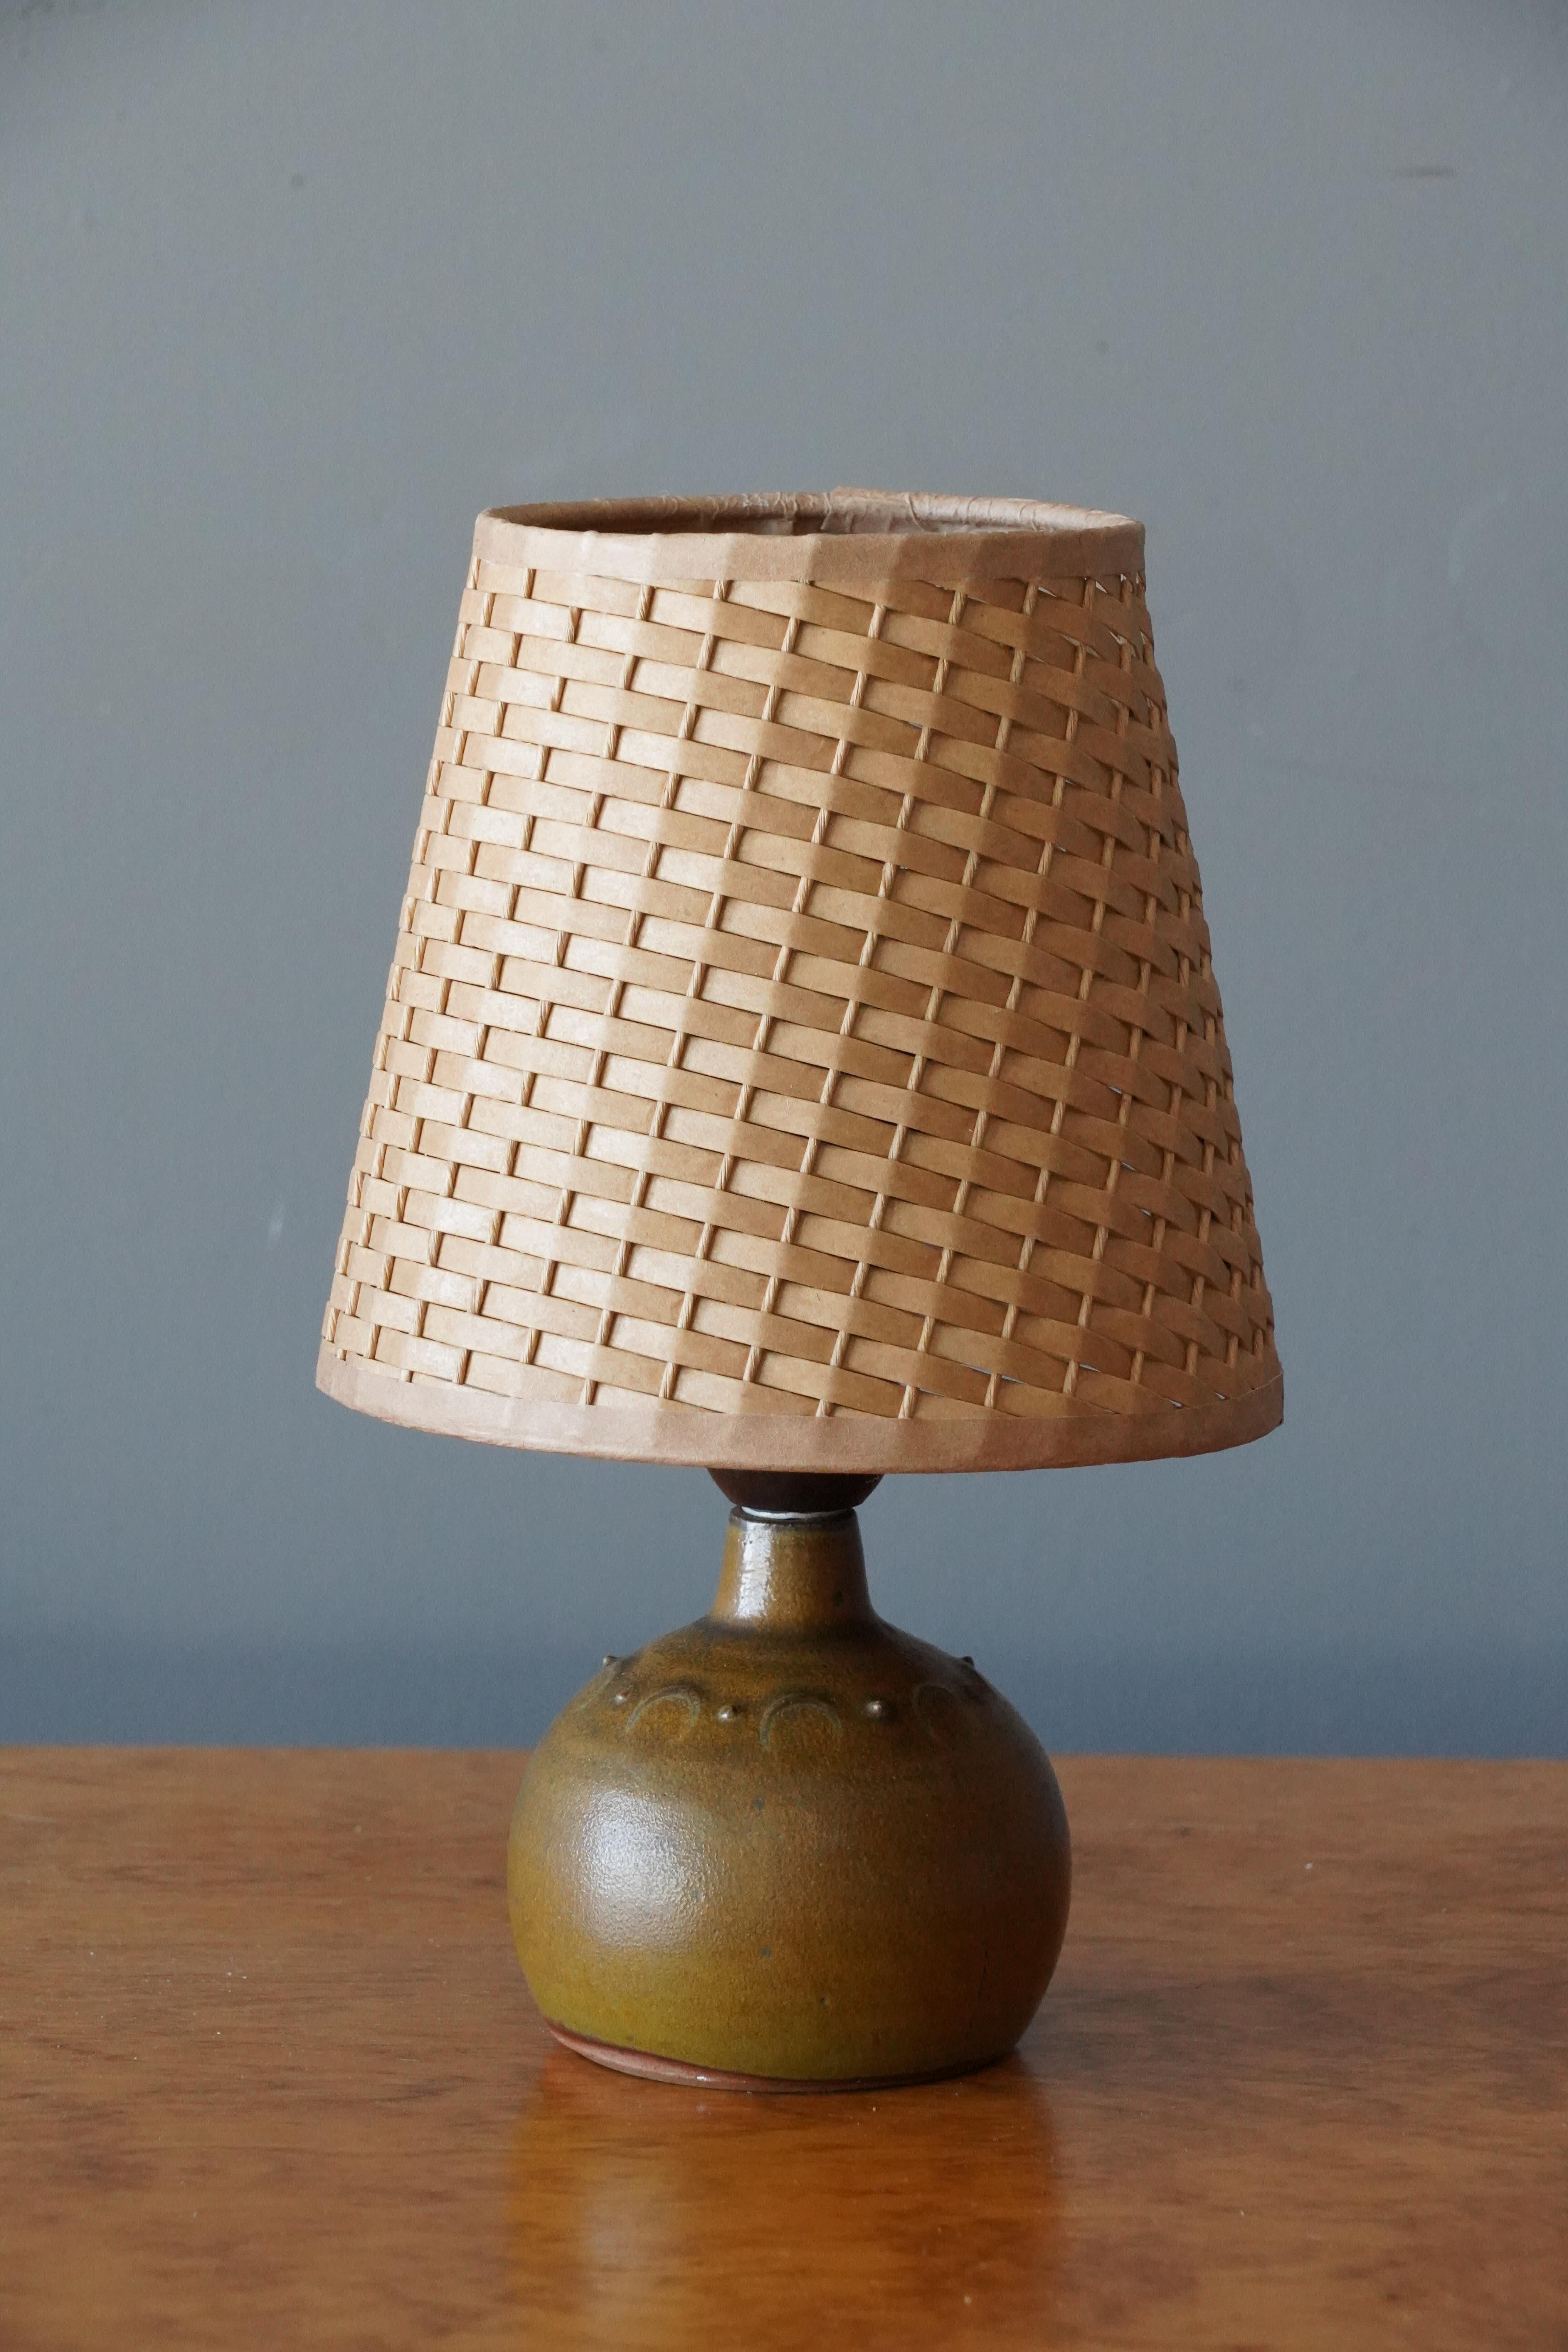 A small table lamp. Produced and designed by Rolf Palm, Sweden.

In glazed stoneware. Stated dimensions exclude lampshade. Height includes socket. Illustrated rattan lampshade can be included upon request.